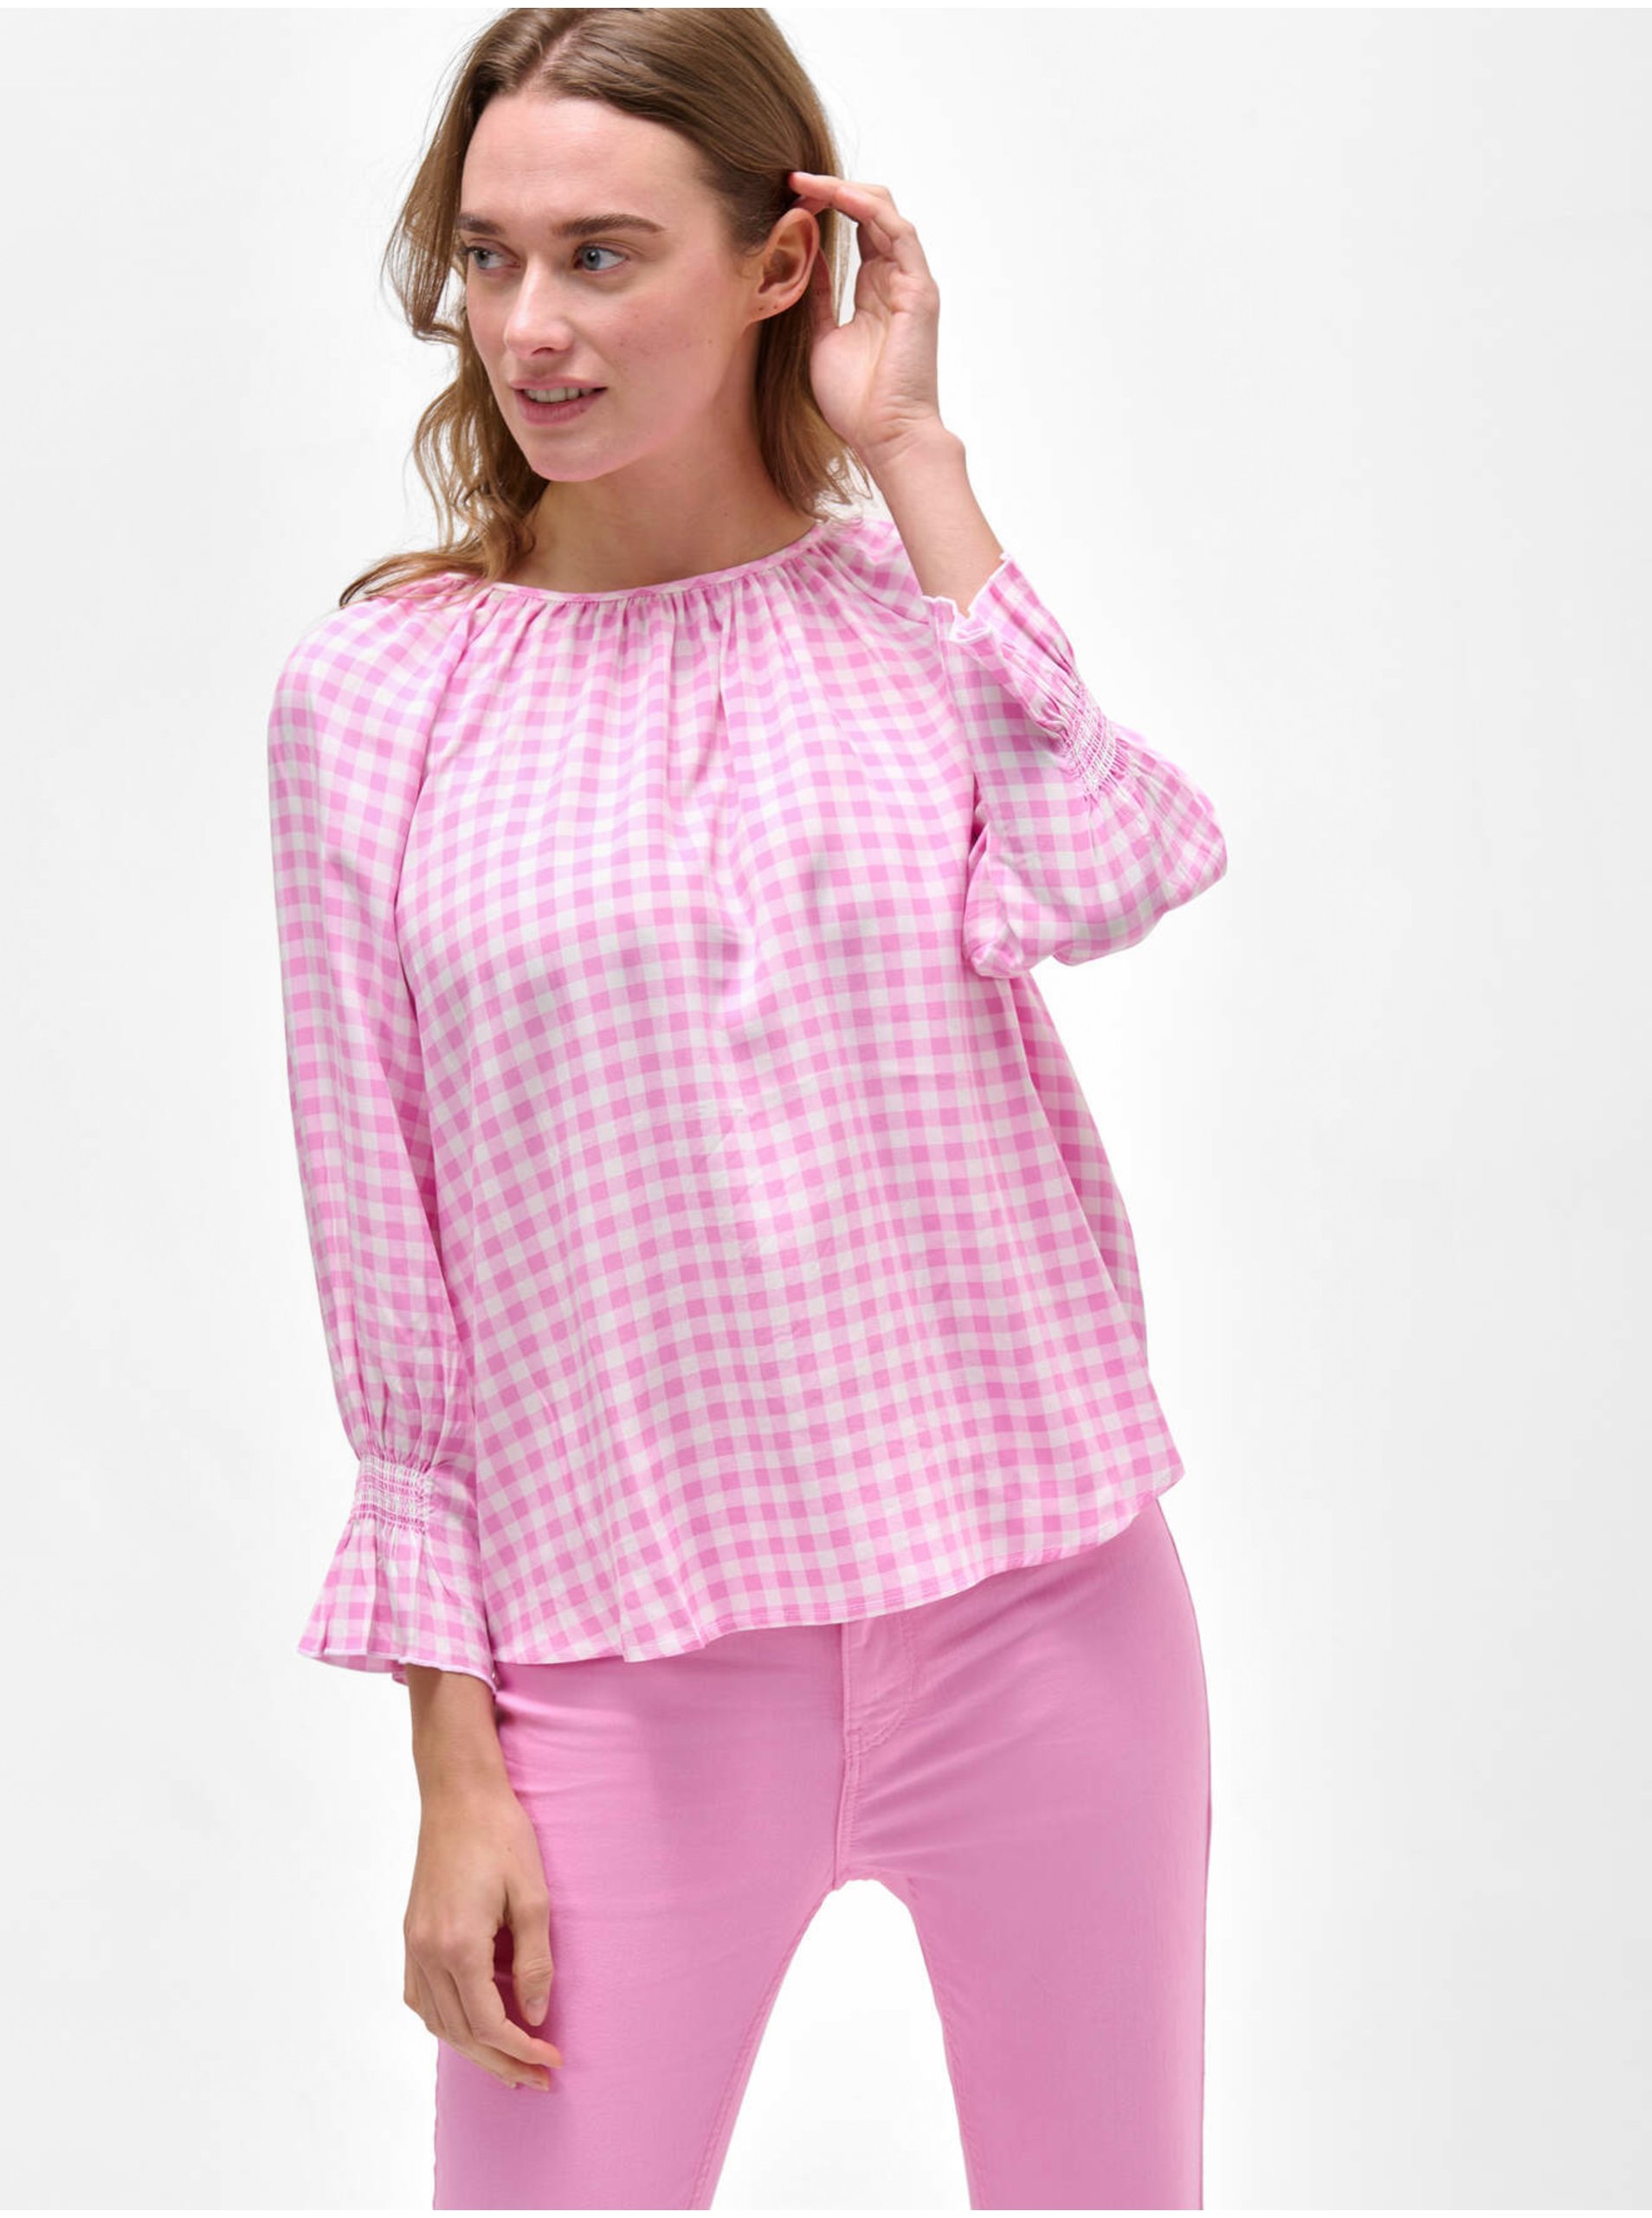 Pink Plaid Blouse With Long Sleeves ORSAY - Women